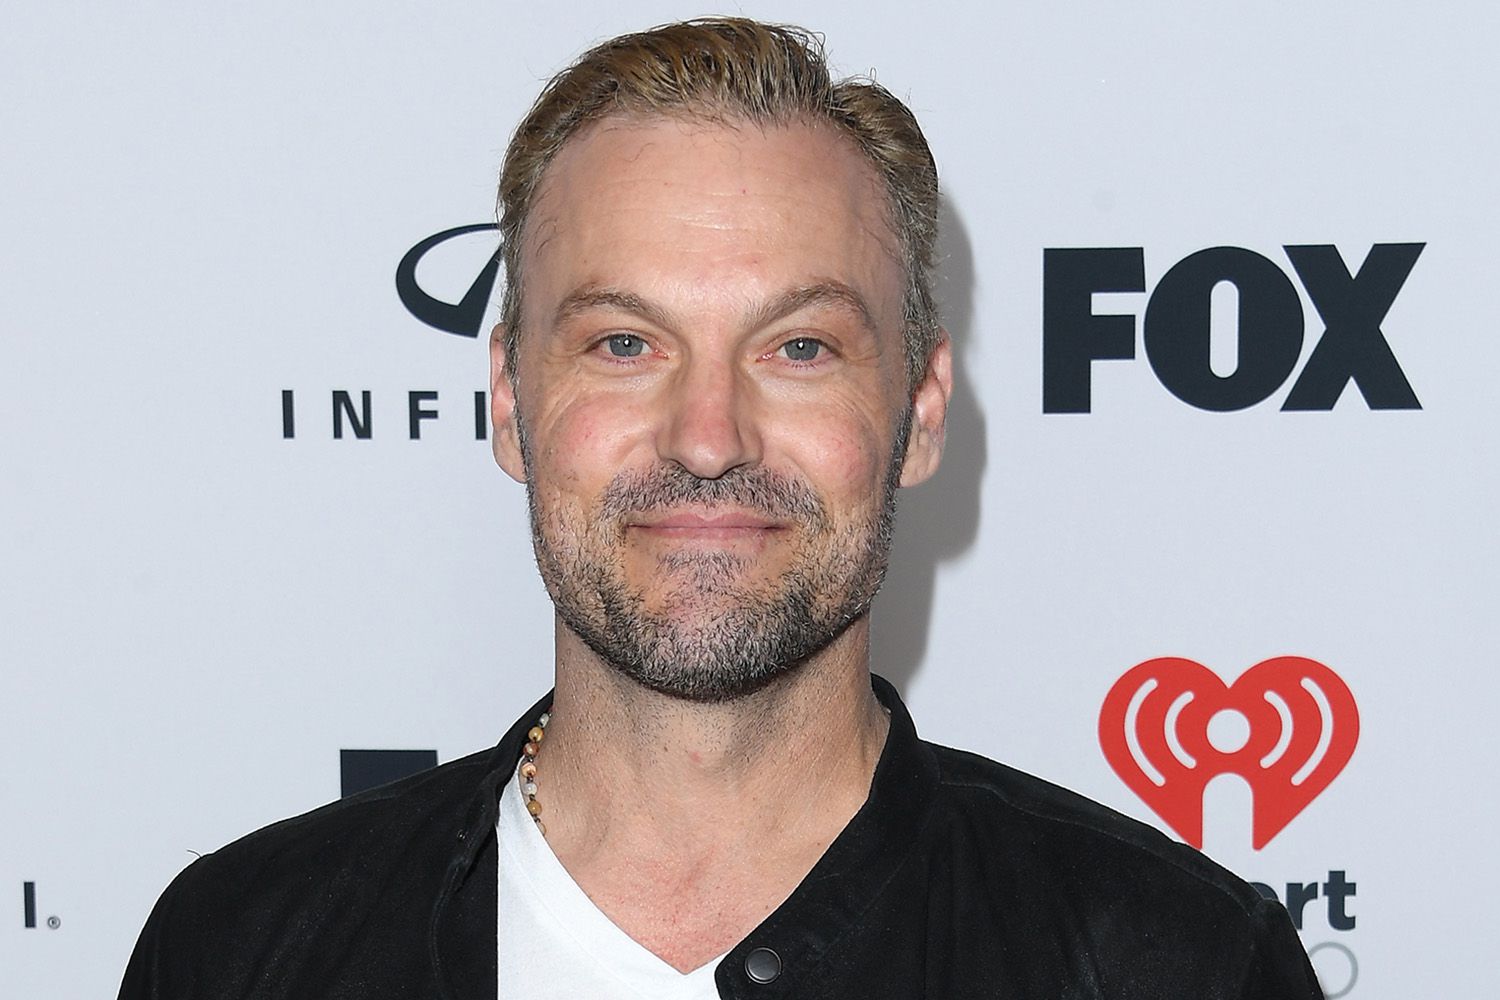 Brian Austin Green Opens Up About Jealousy During Ex Tiffani Thiessen’s Sex Scenes